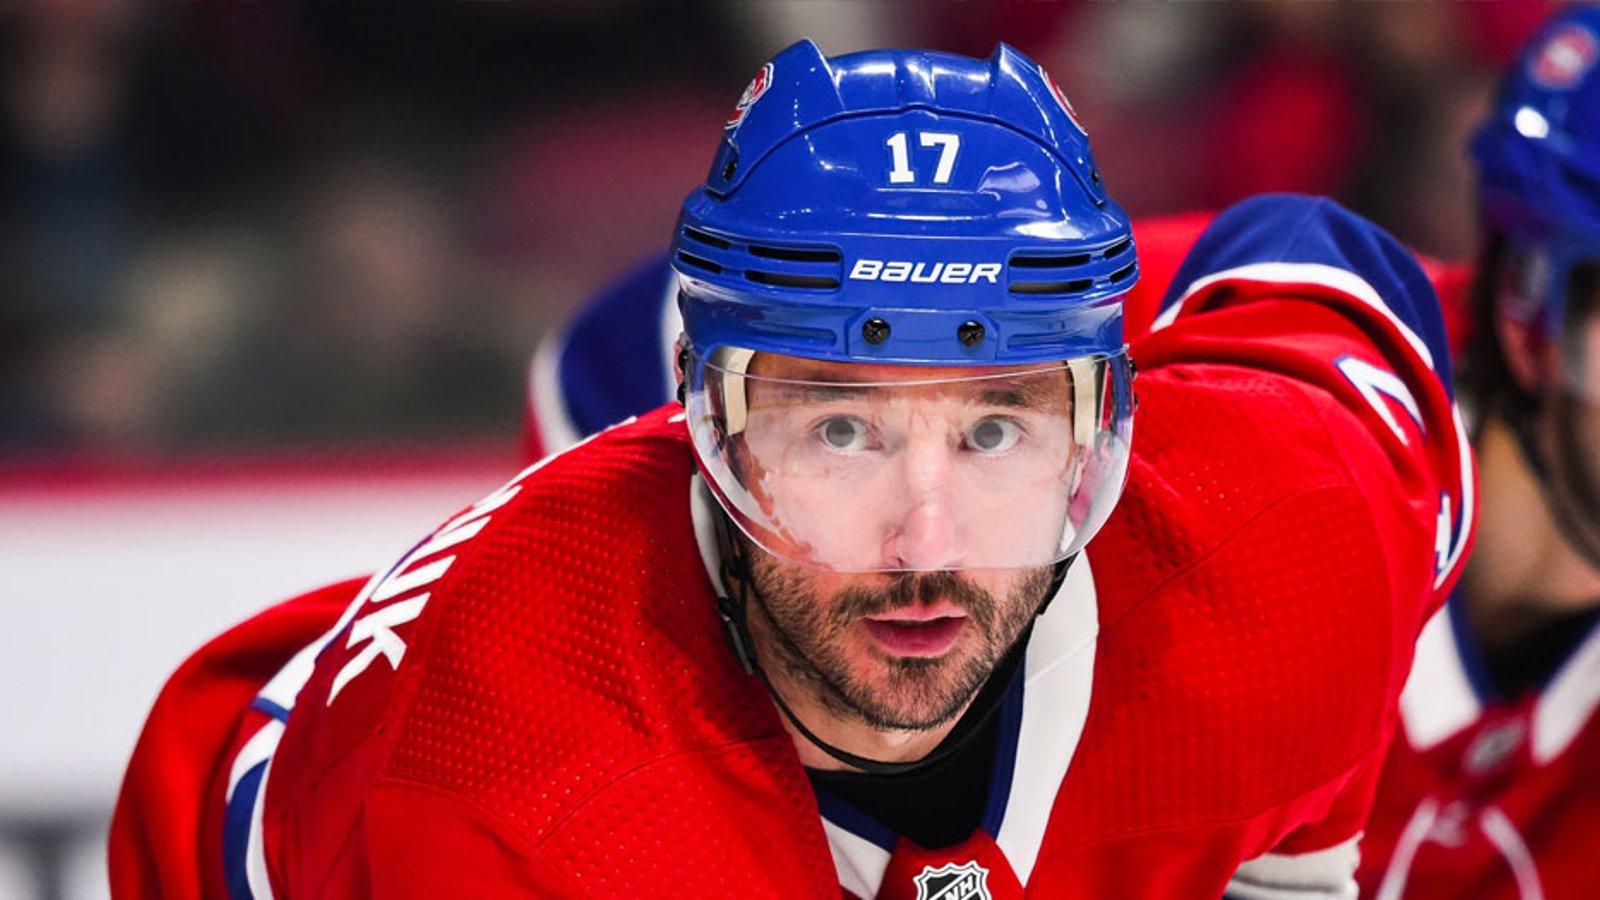 Report: Kovalchuk has his mind made up on NHL future